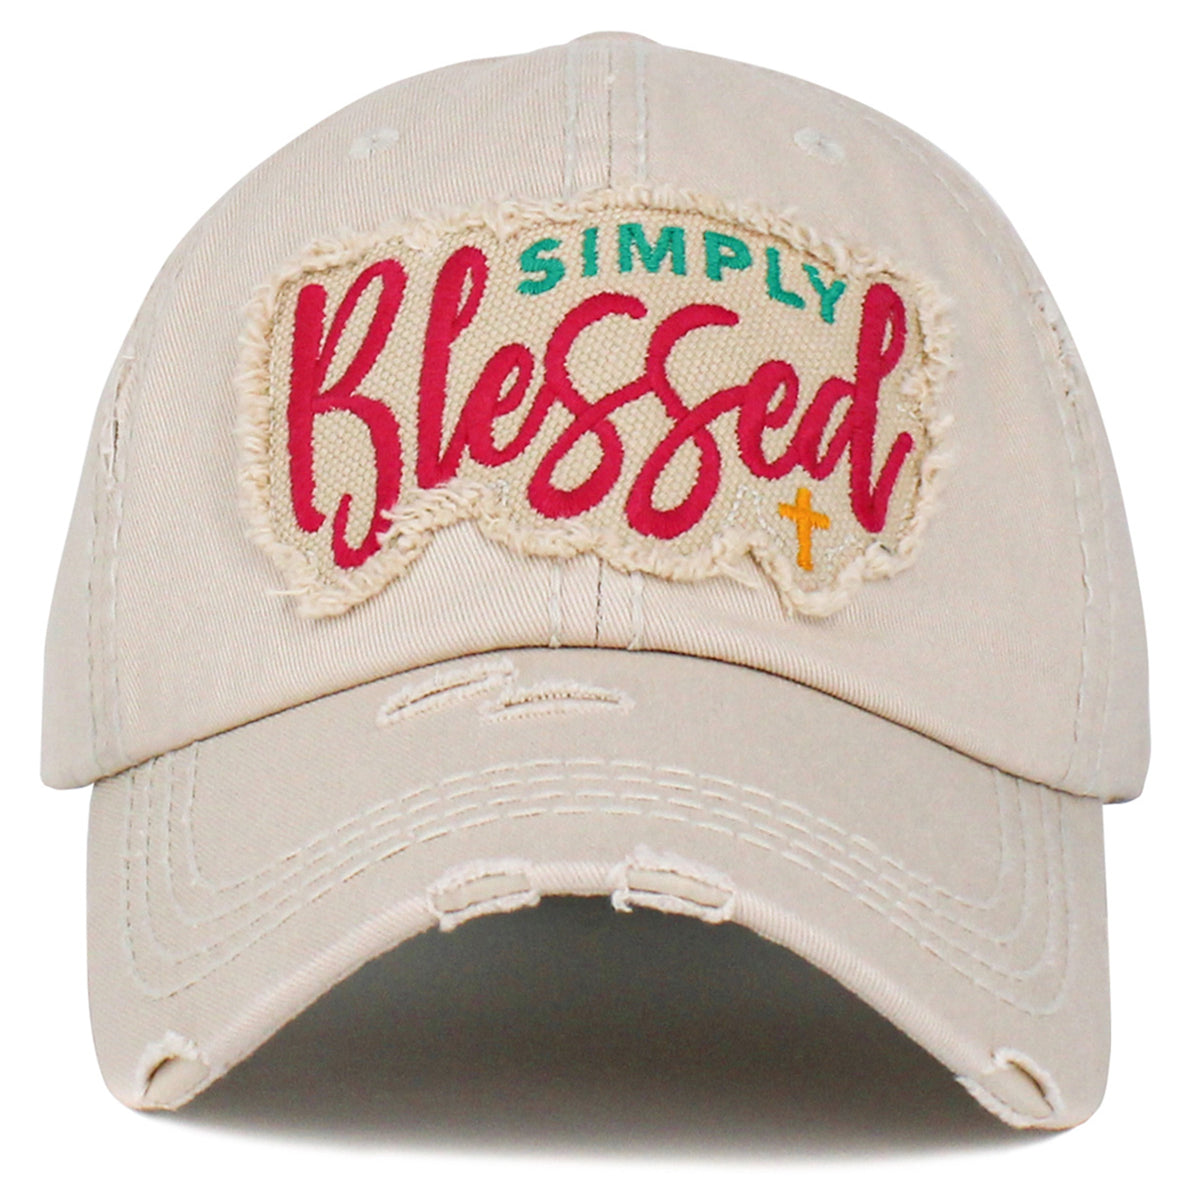 1446 - Simply Blessed Hat - Stone